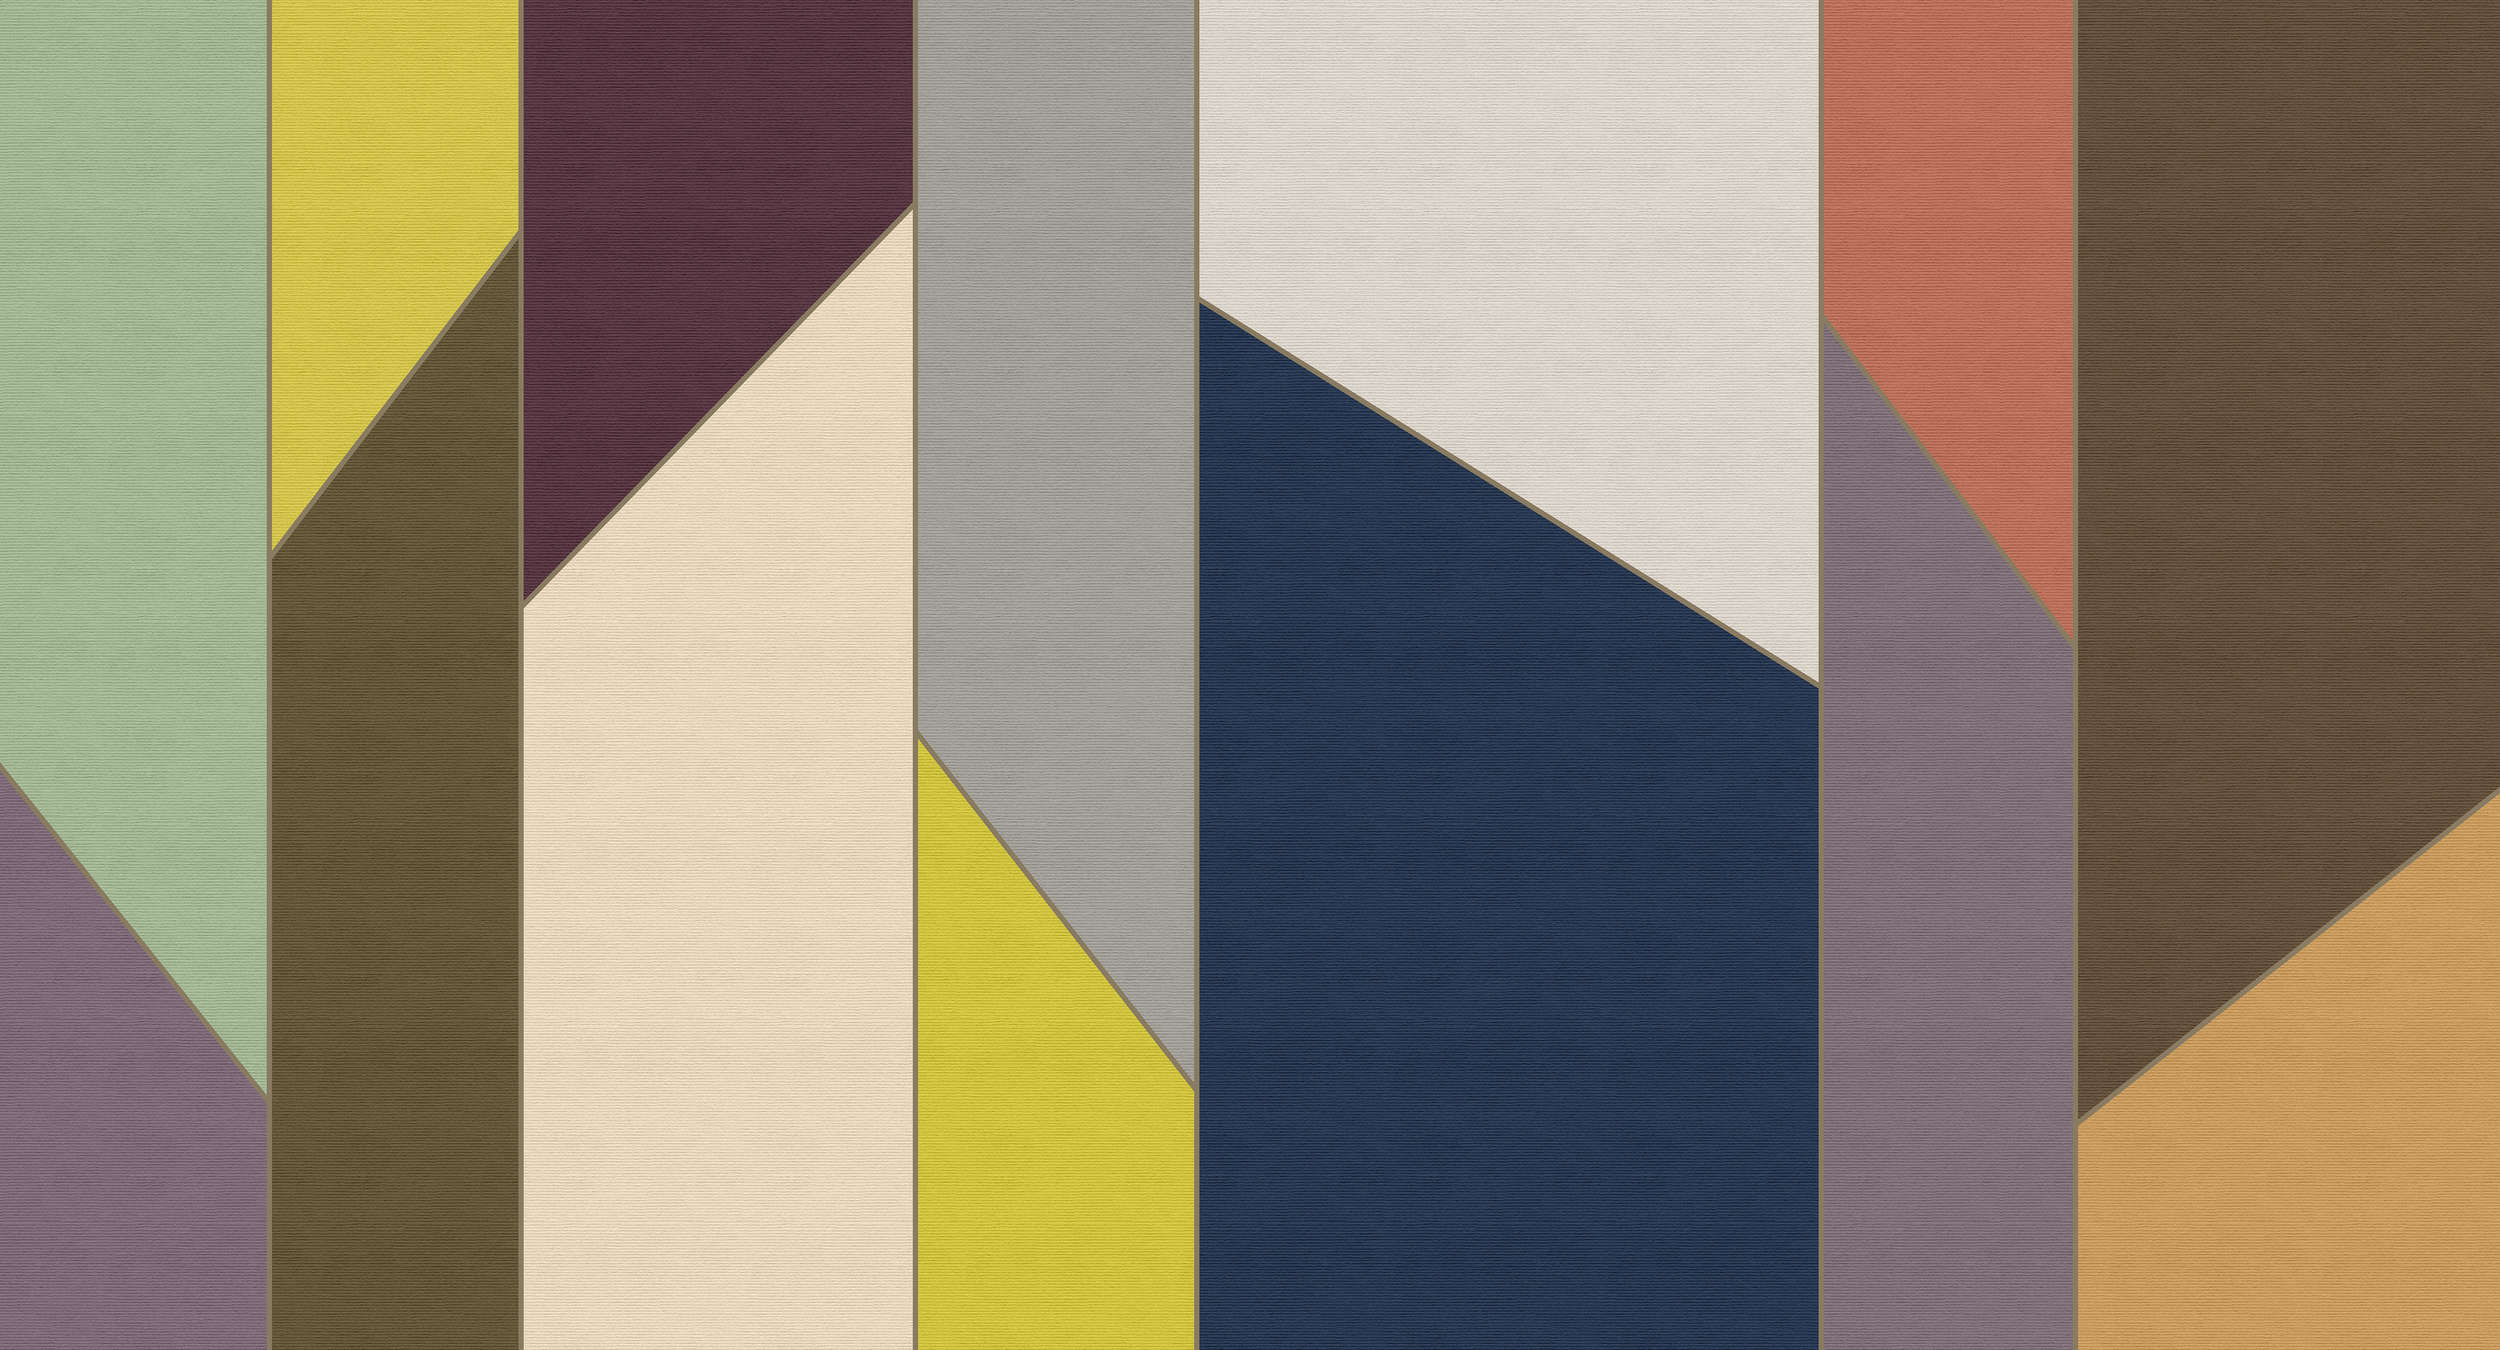             Geometry 4 - Stripe wallpaper colourful retro design in ribbed structure - Beige, Blue | Pearl smooth fleece
        